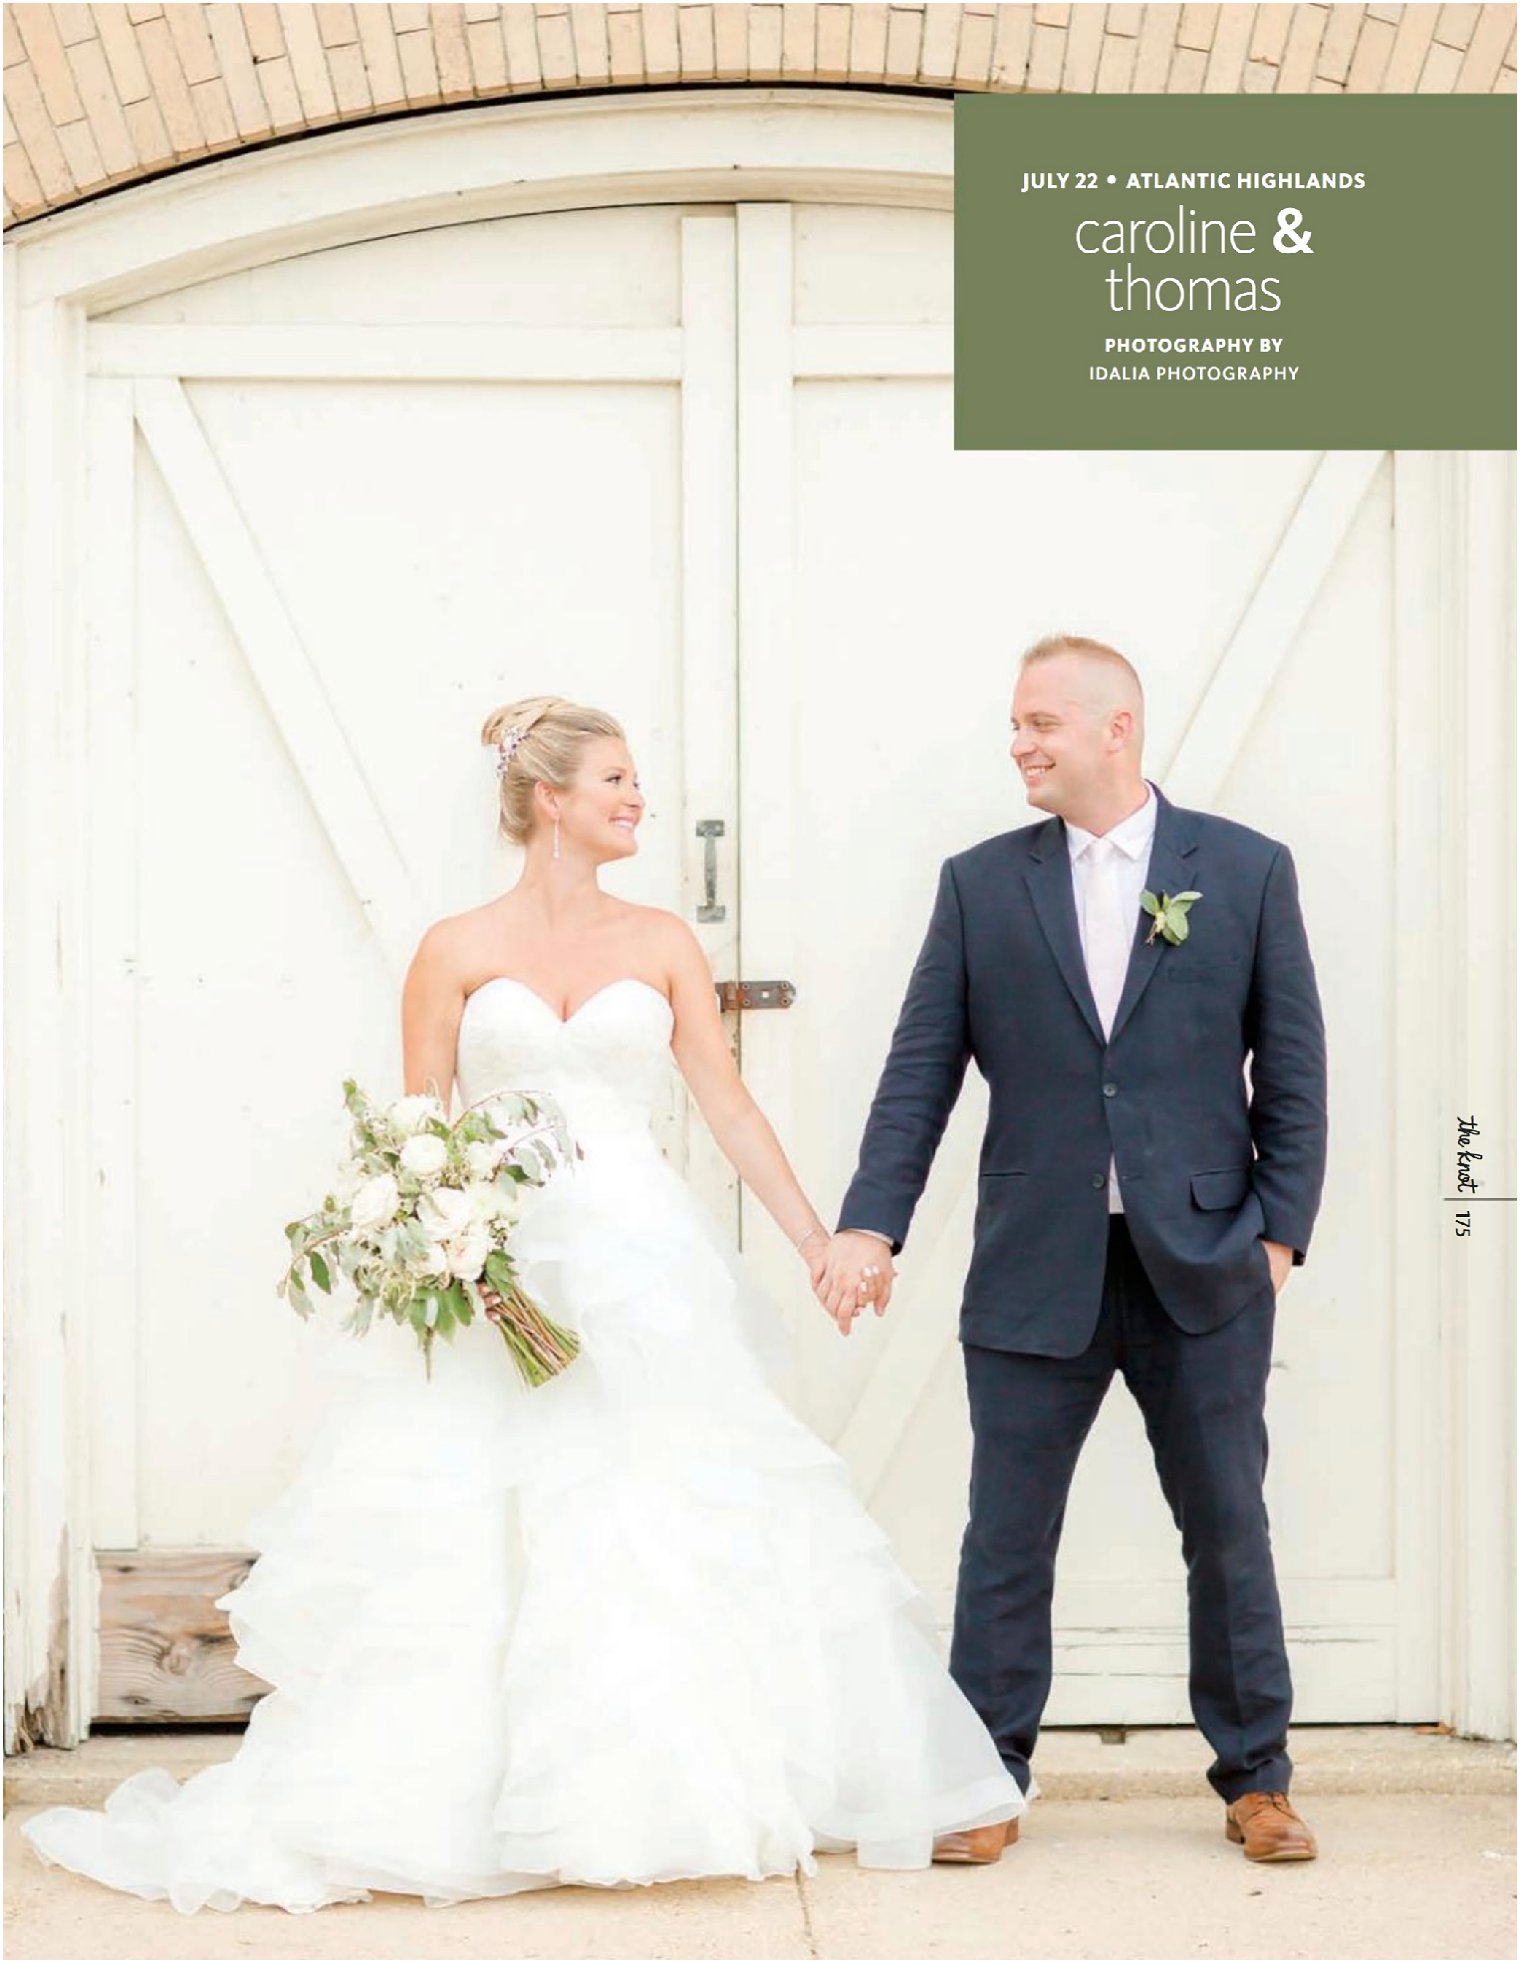 Published in The Knot NJ Spring/Summer 2018